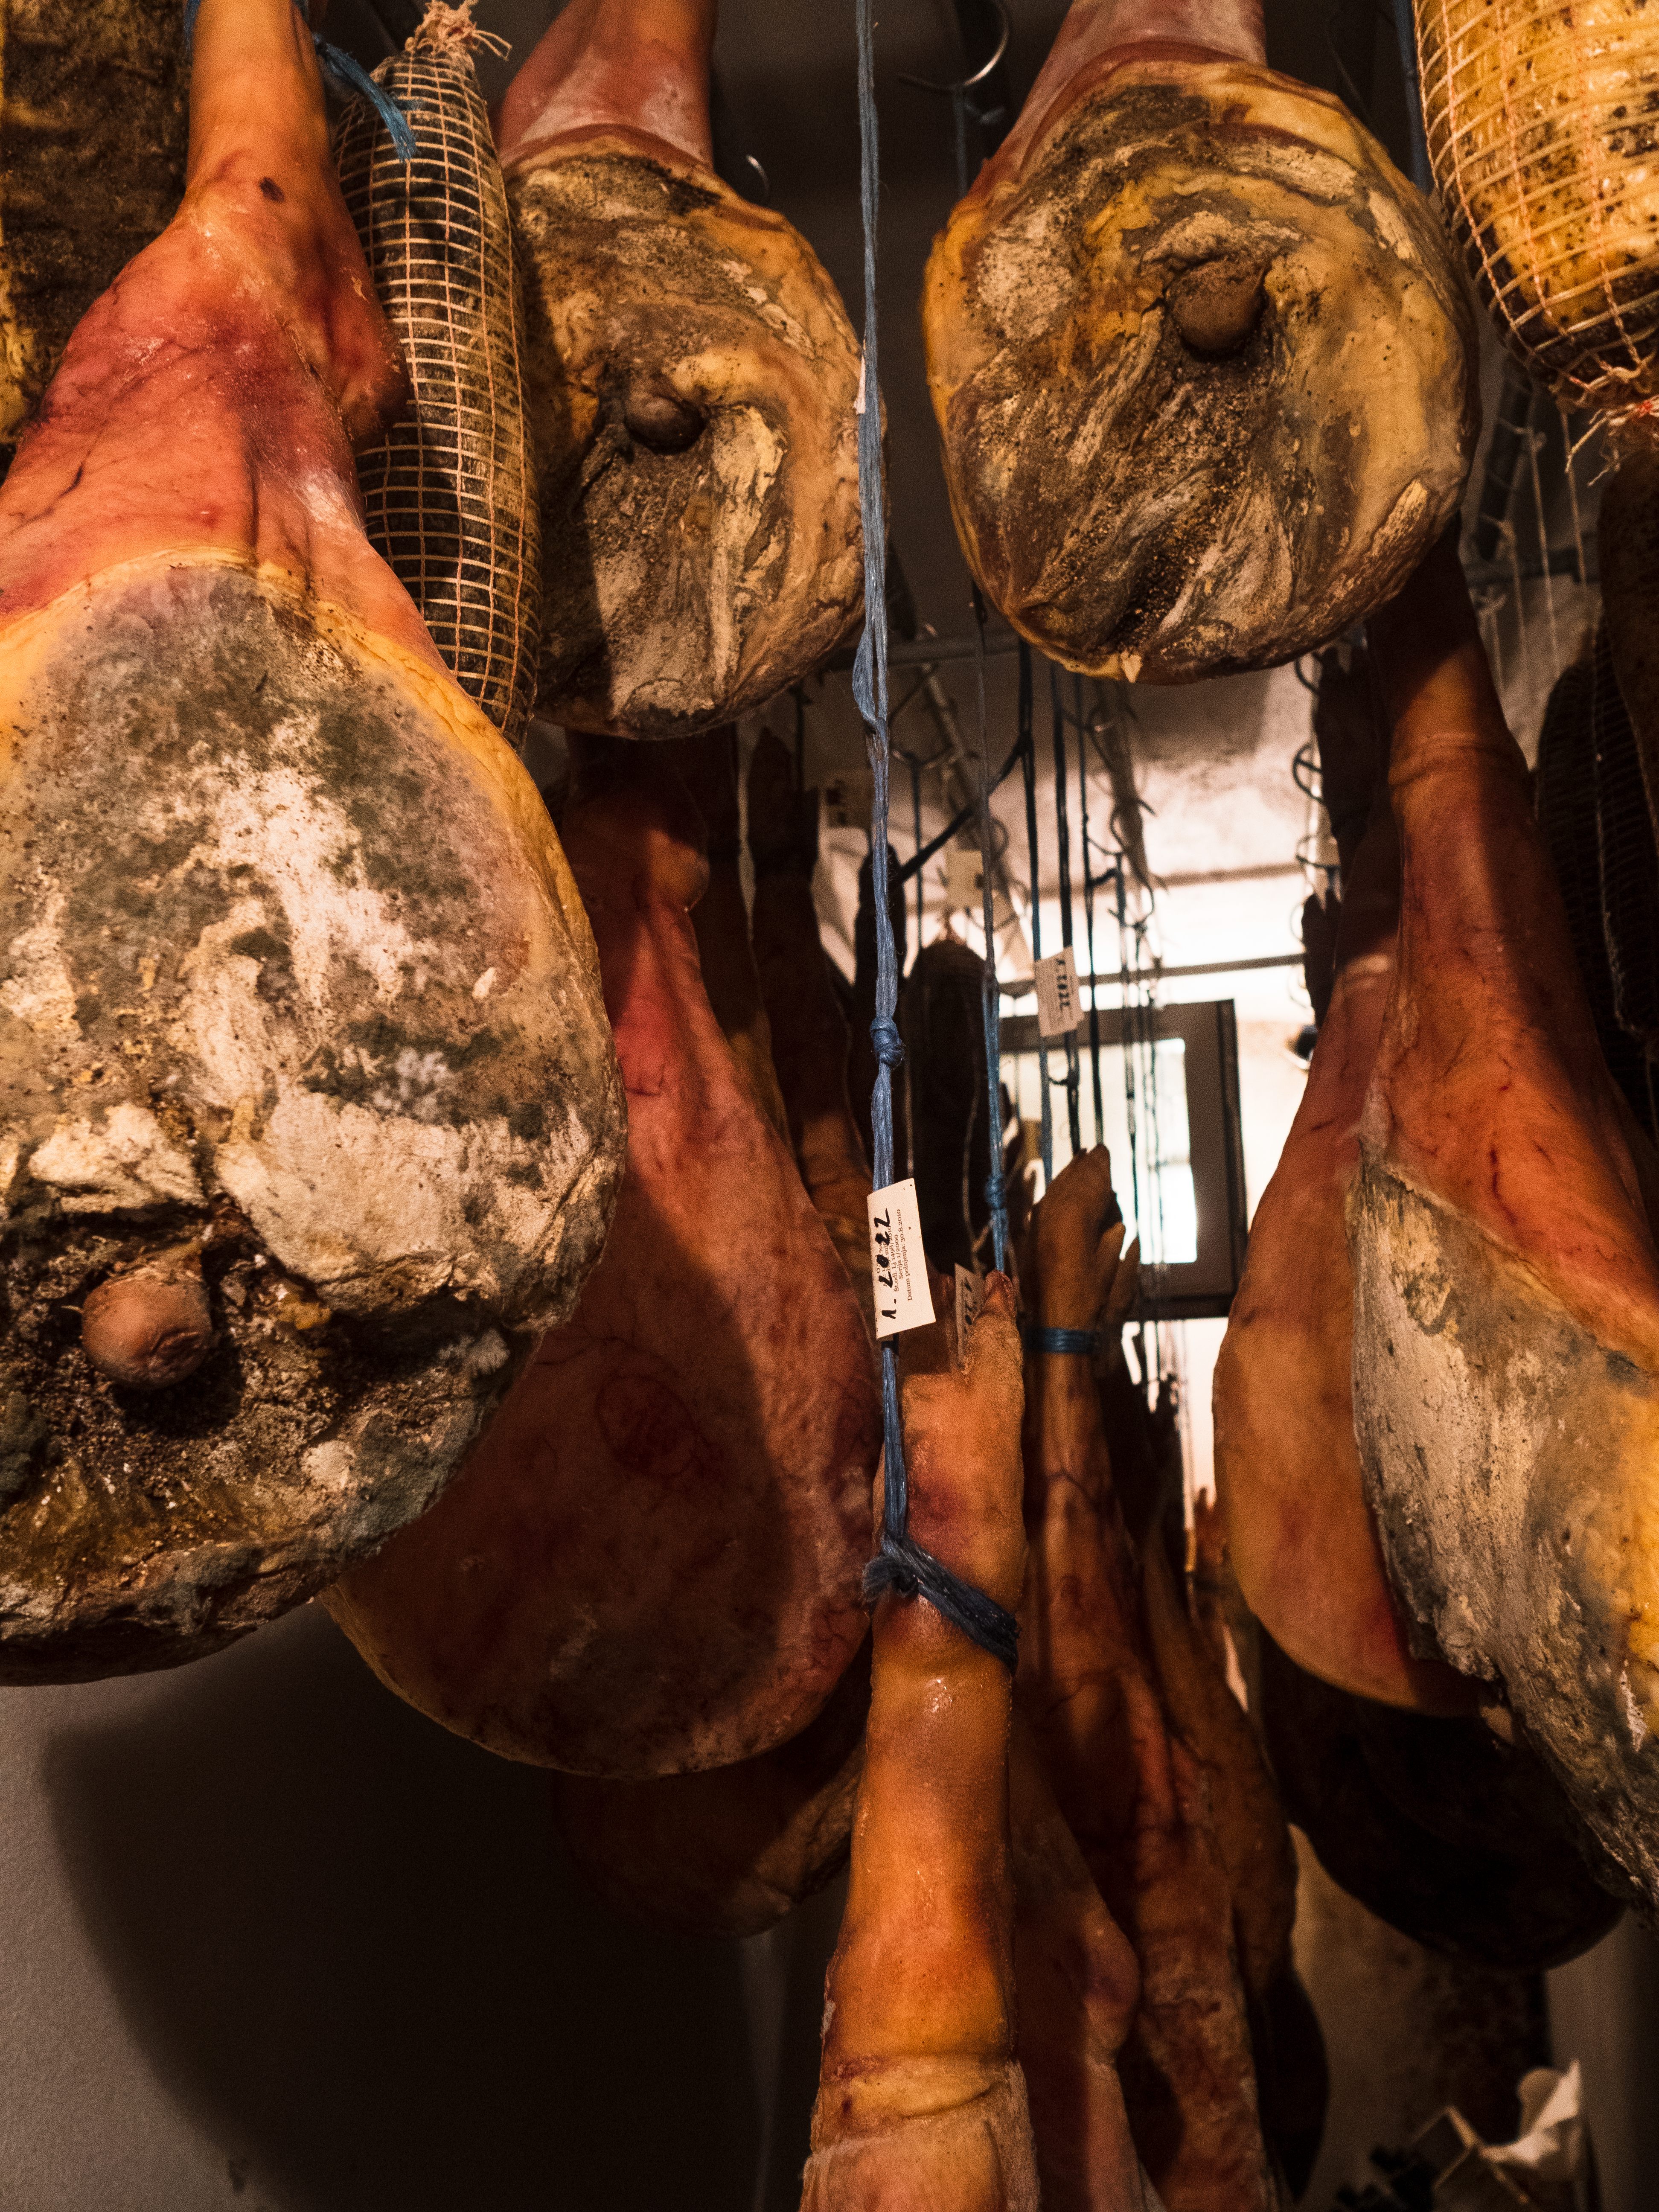 Vipava residents let the wind dry their hams, leading to a delicate flavor.